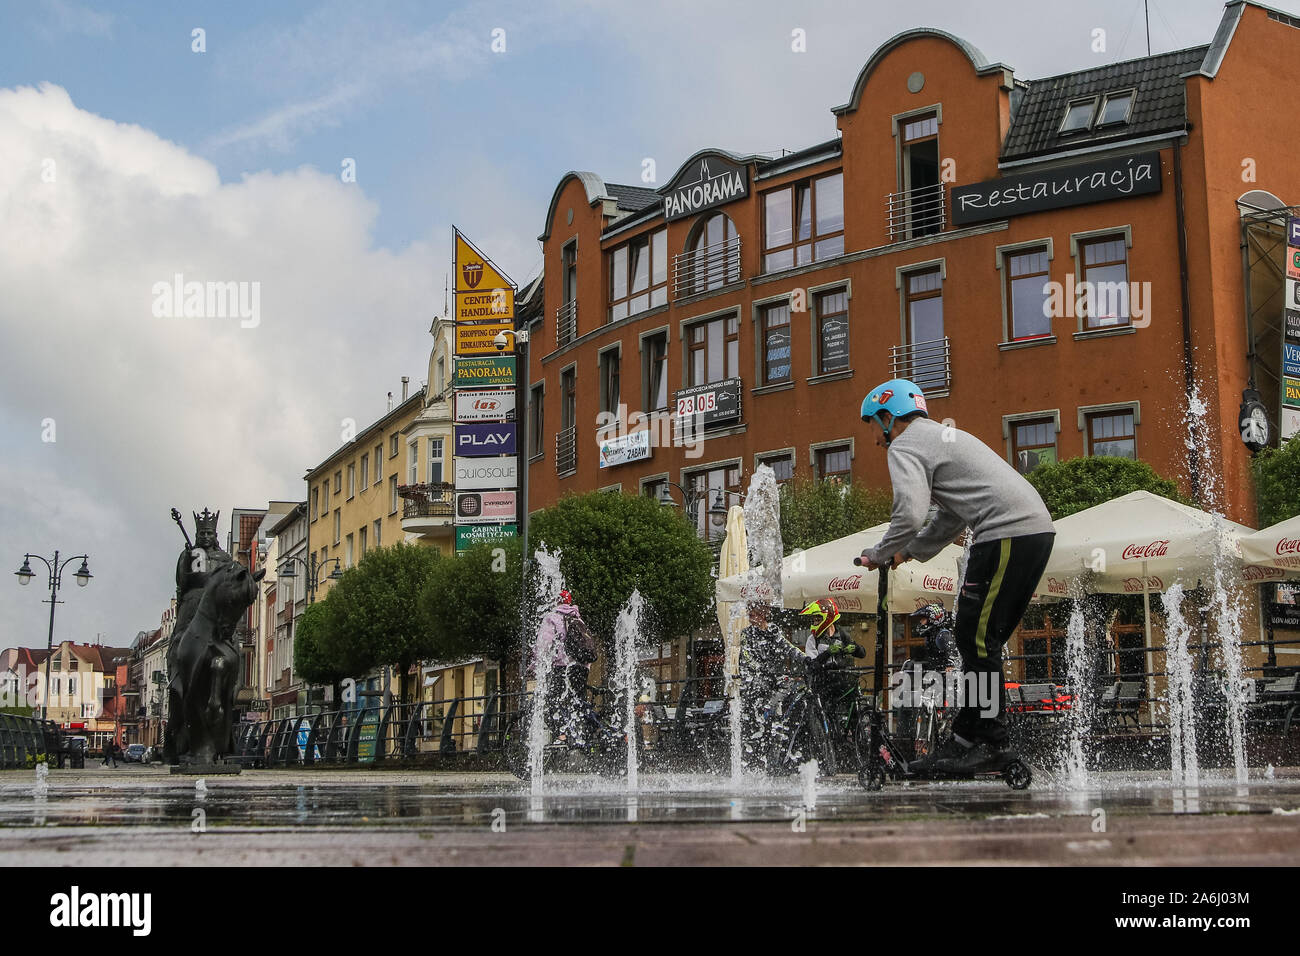 Children riding on bikes and scooters near the fountain in front of Casimir IV Jagiellon (Kazimierz Jagiellonczyk) monument are seen in the centre city of Malbork, Poland, on 18 May 2019  © Michal Fludra / Alamy Live News Stock Photo